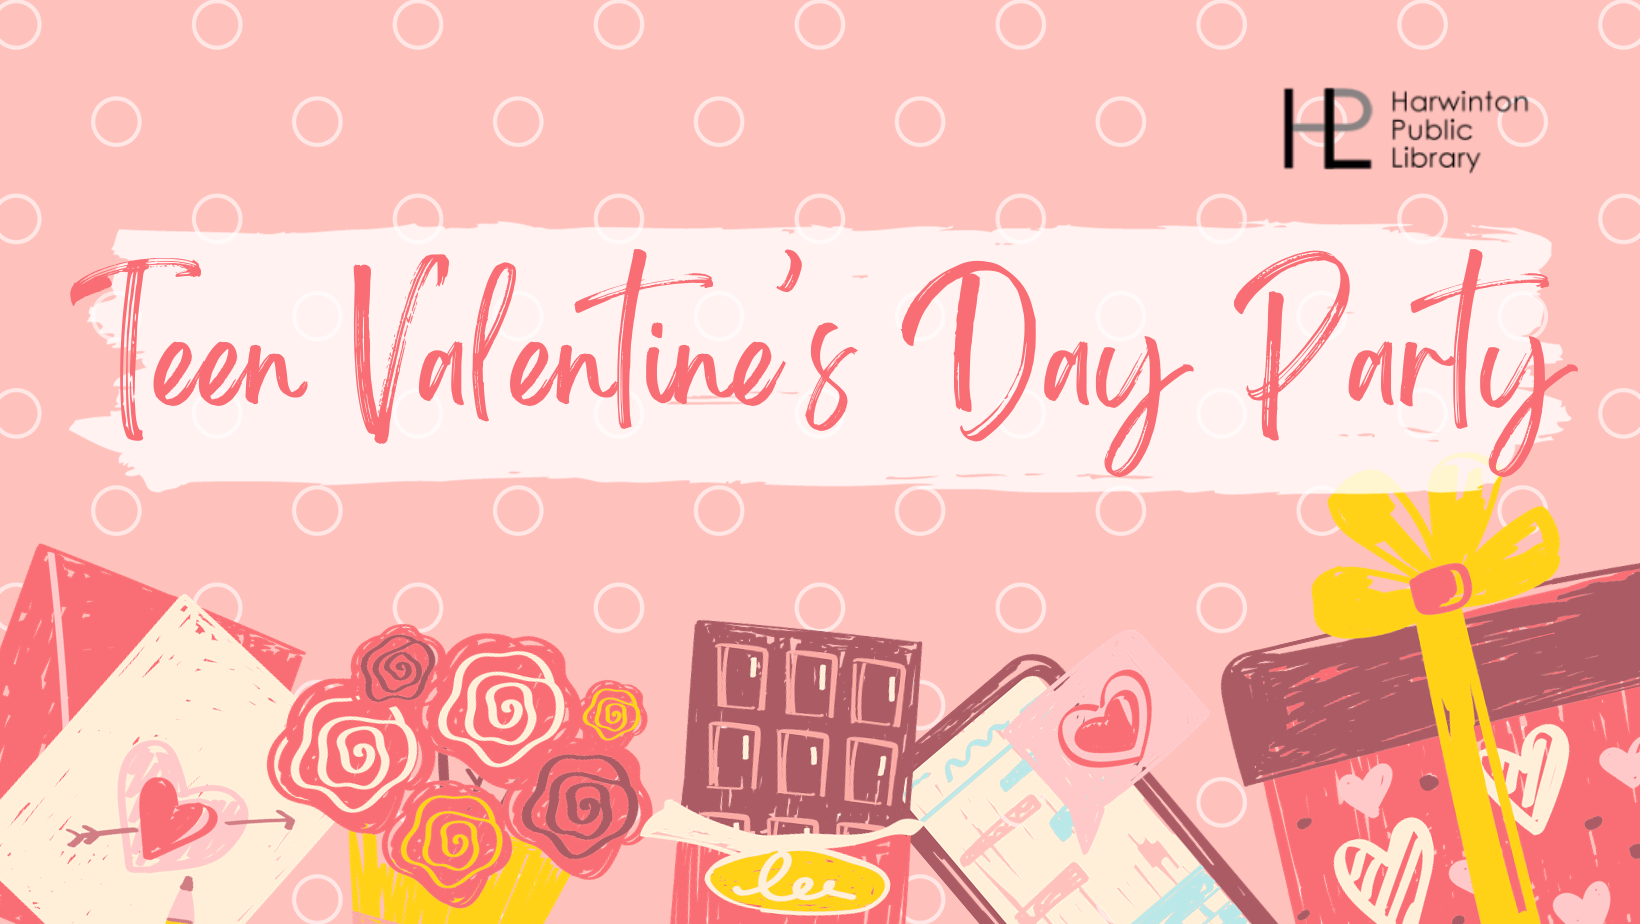 Teen Valentine's Day Party